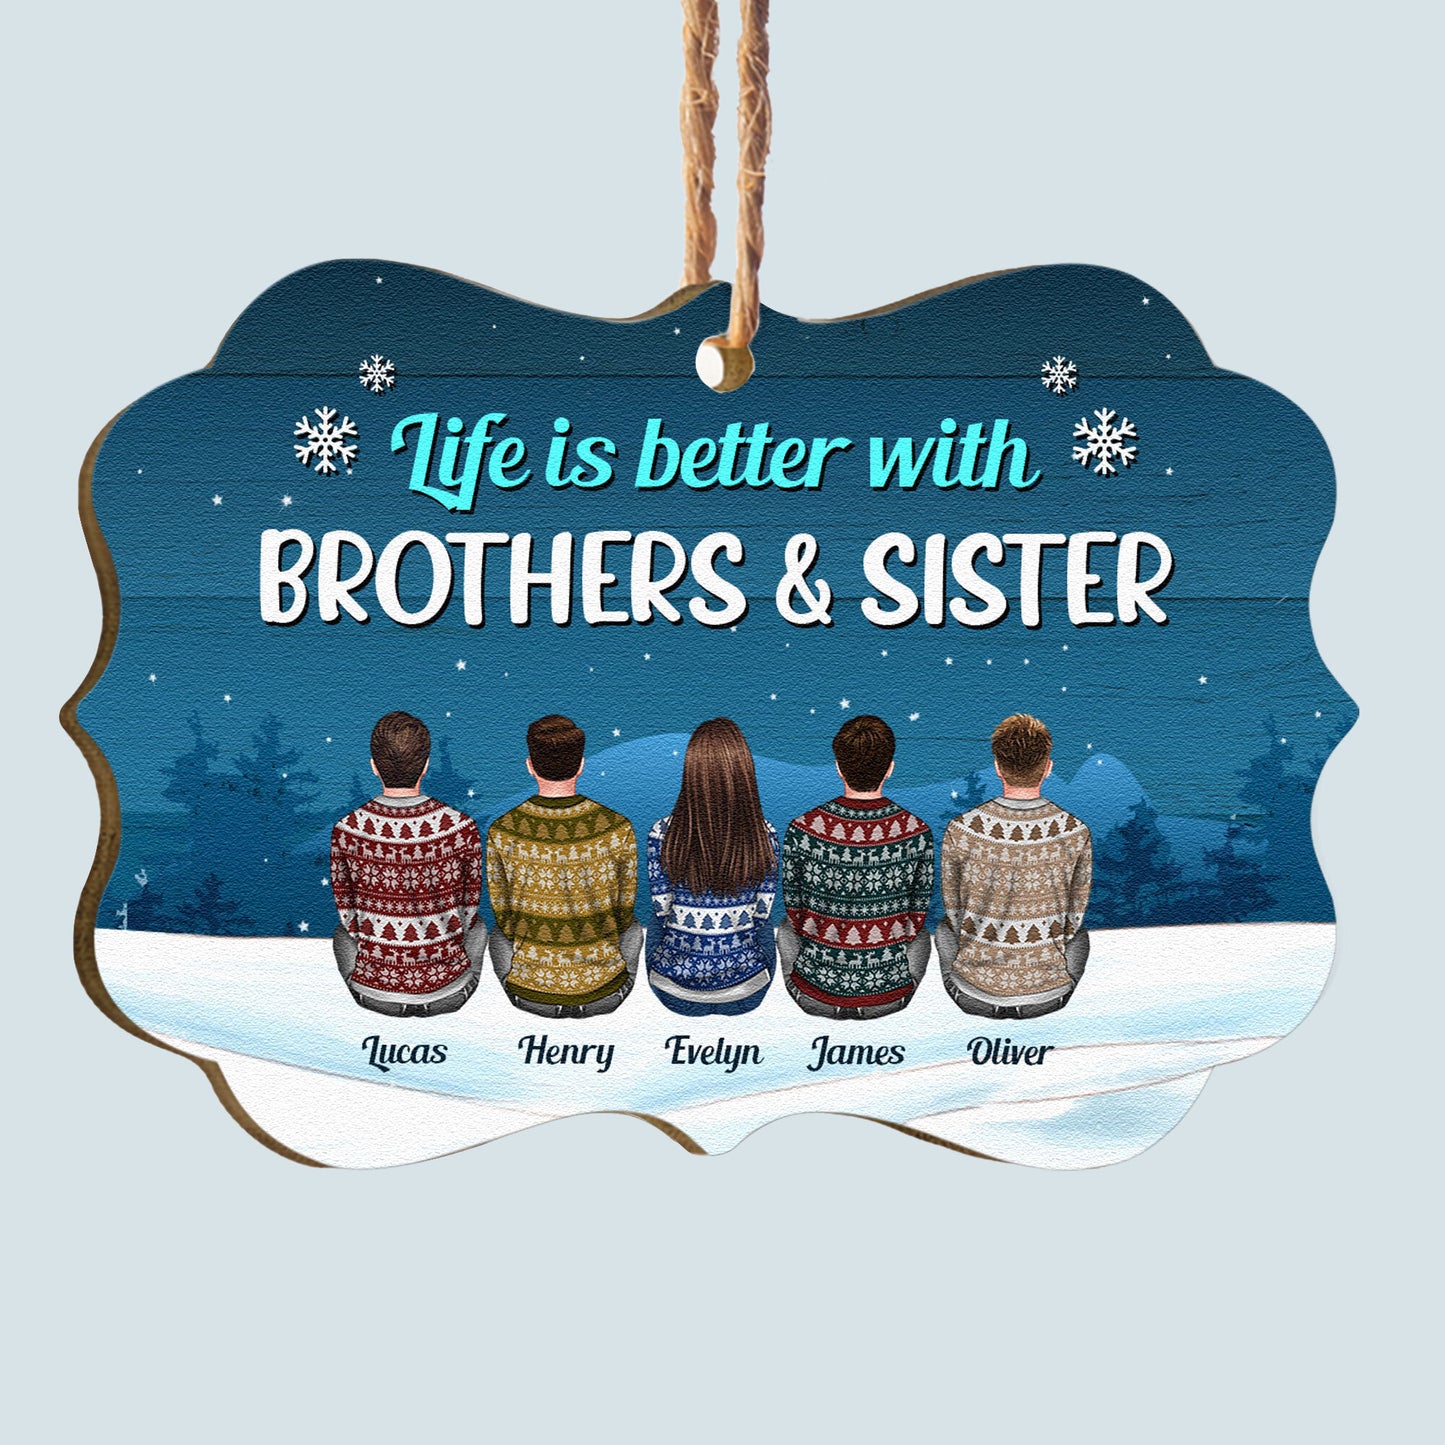 Life Is Better With Brothers & Sisters - Personalized Aluminum/Wooden Ornament - Ugly Christmas Sweater Sitting